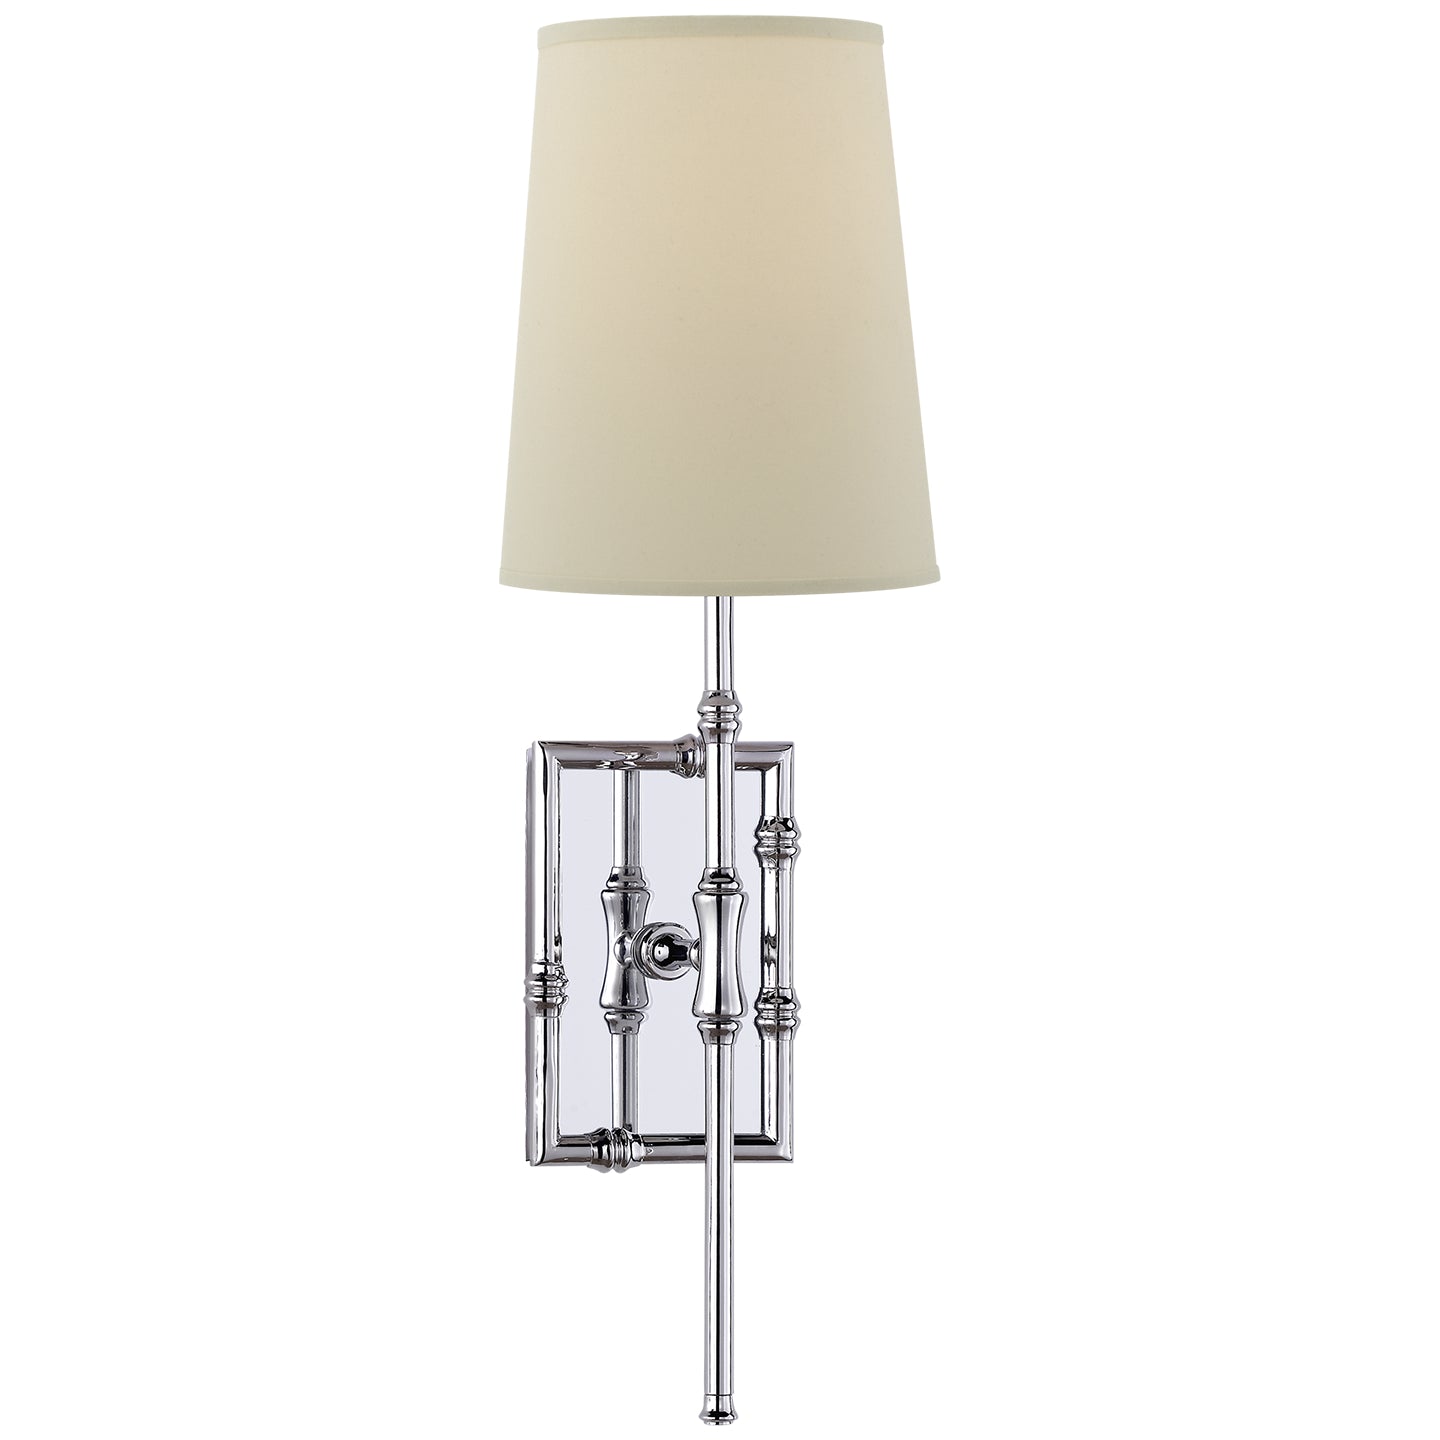 Load image into Gallery viewer, Visual Comfort Signature - S 2177PN-PL - One Light Wall Sconce - Grenol - Polished Nickel
